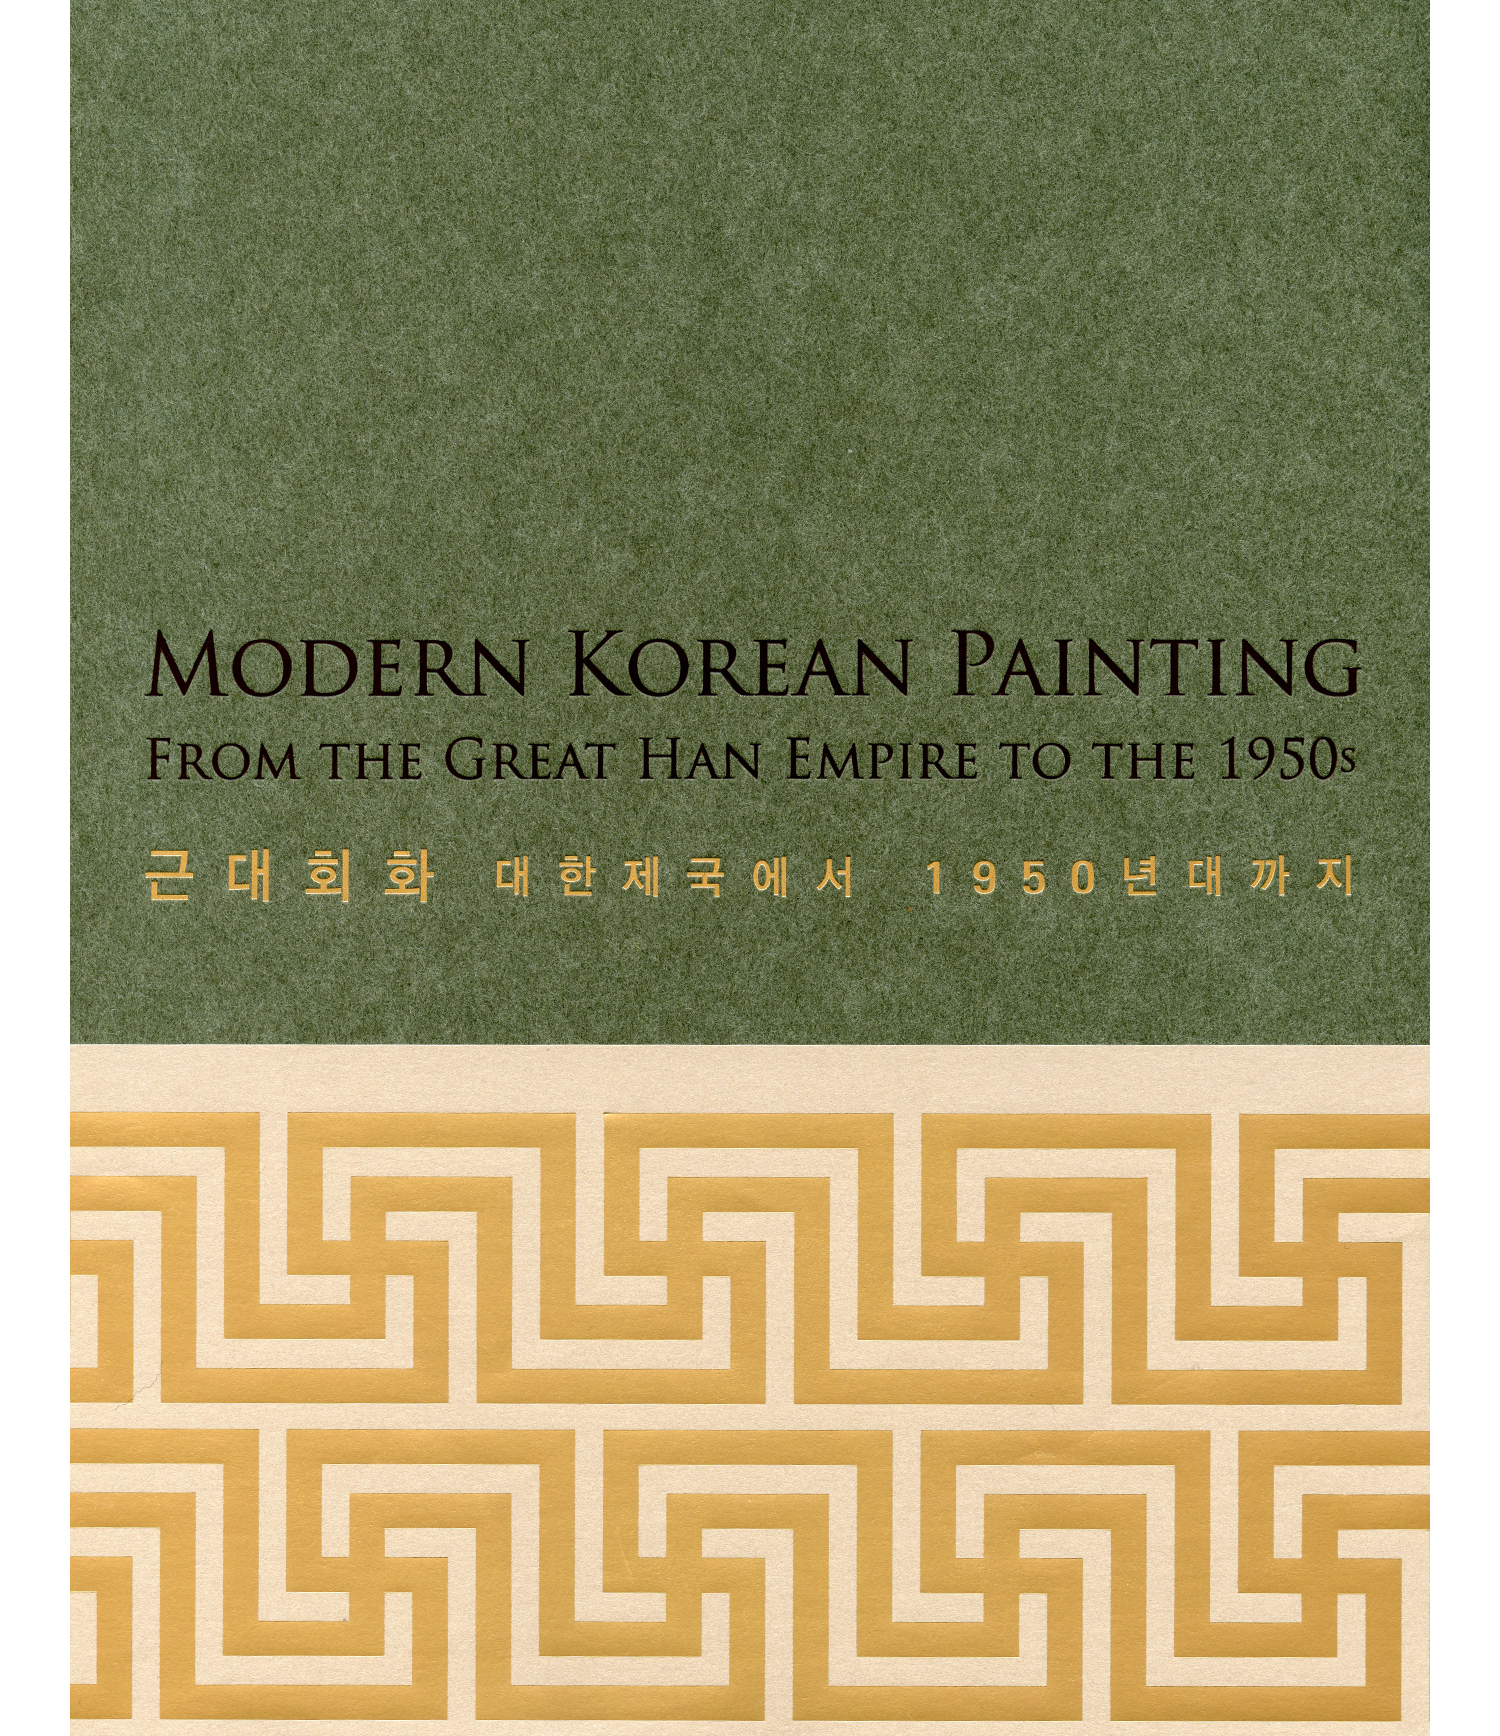 MODERN KOREAN PAINTING: FROM THE GREAT HAN EMPIRE TO THE 1950s